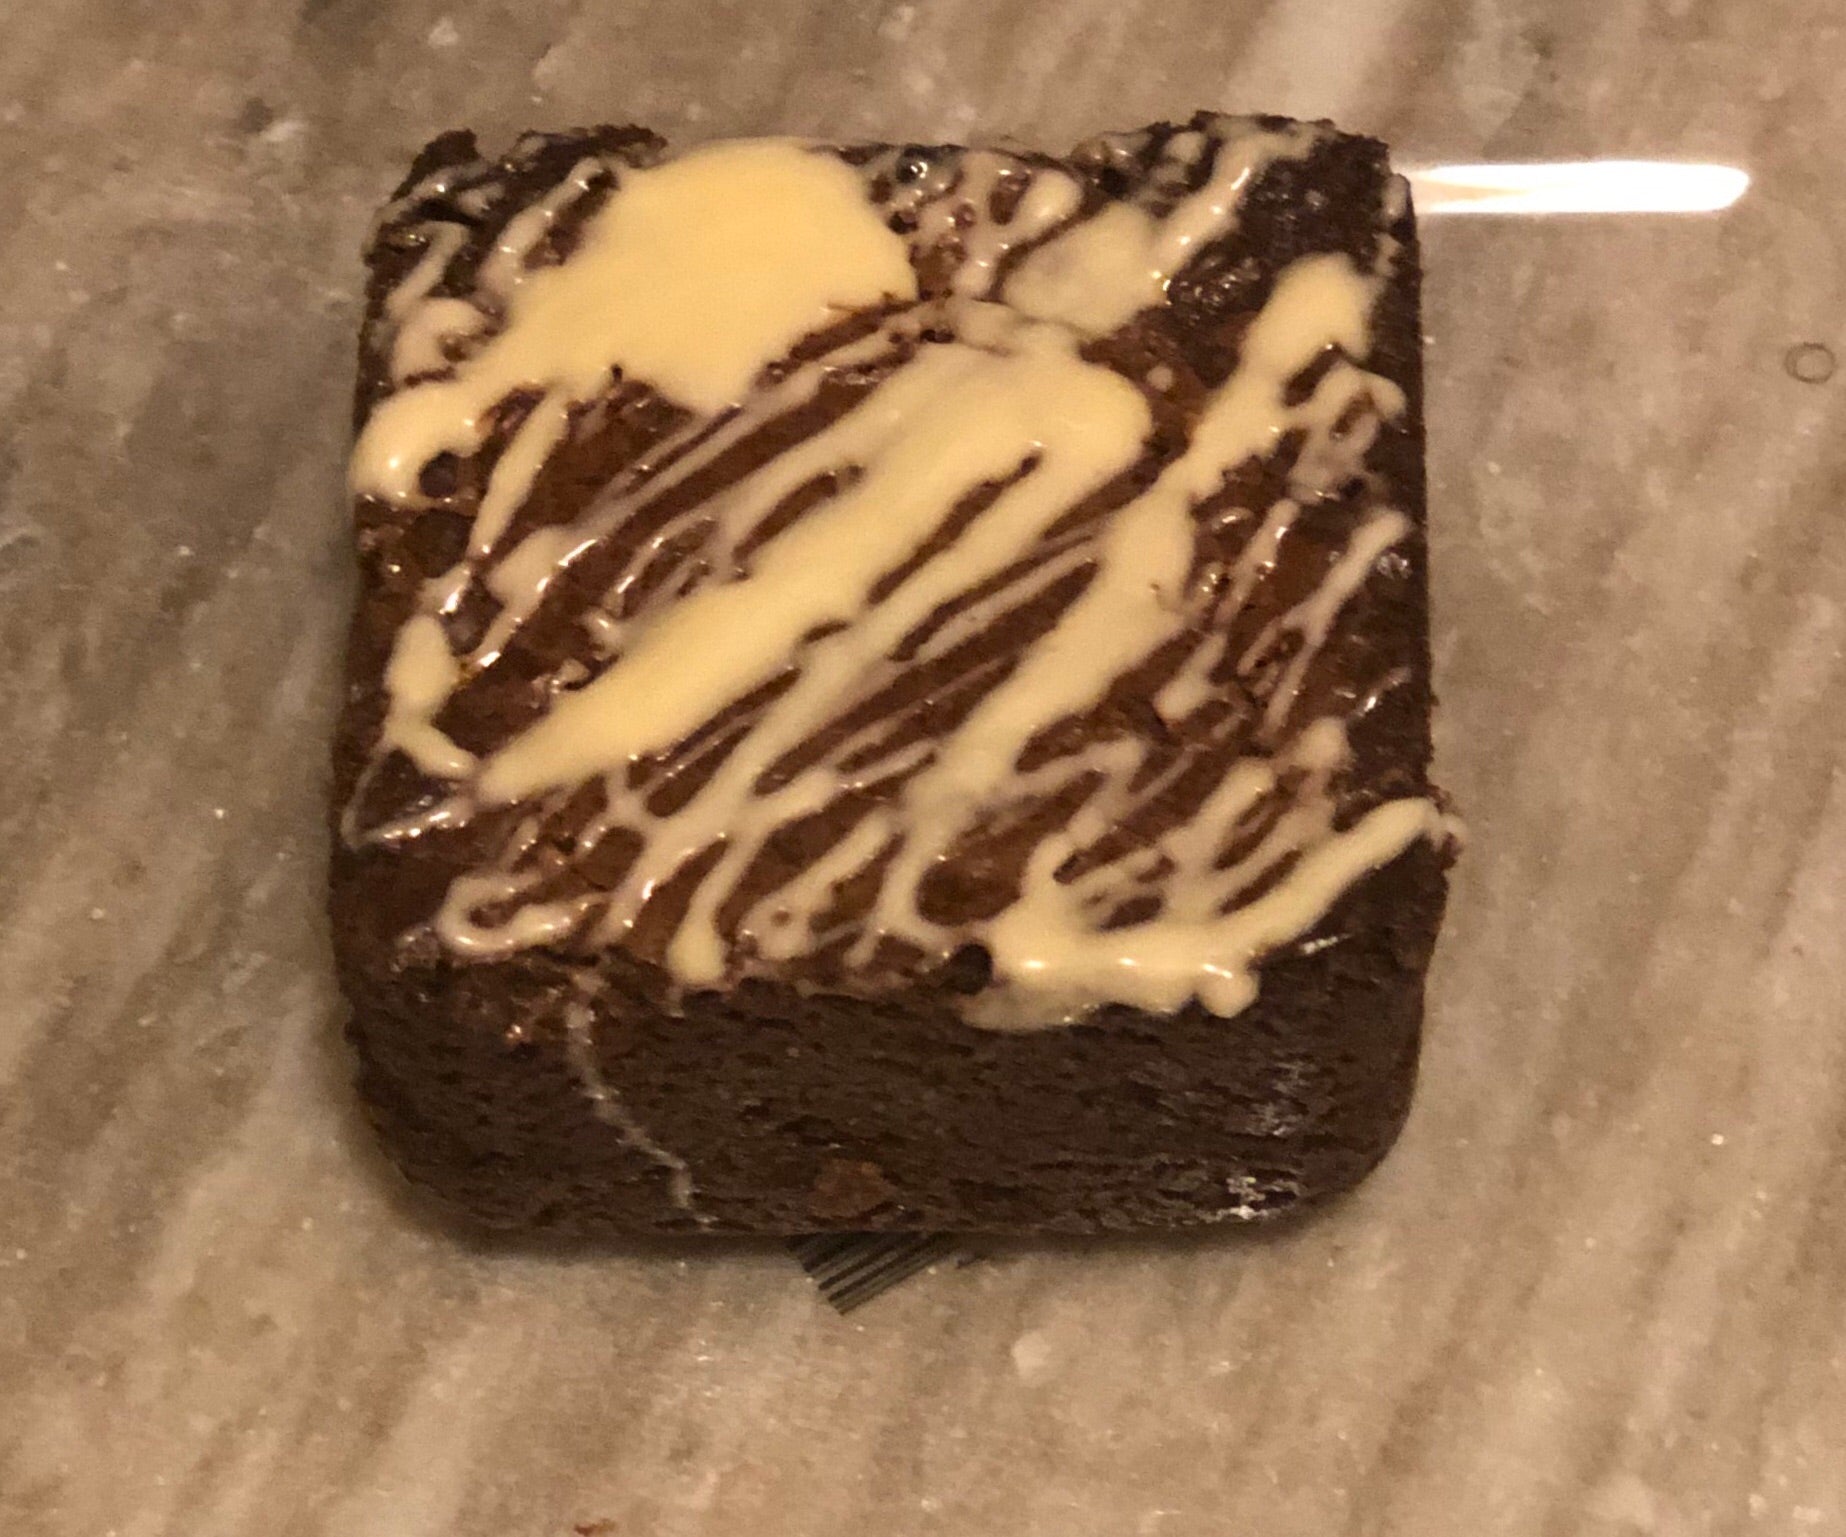 2 Gluten and dairy free brownies